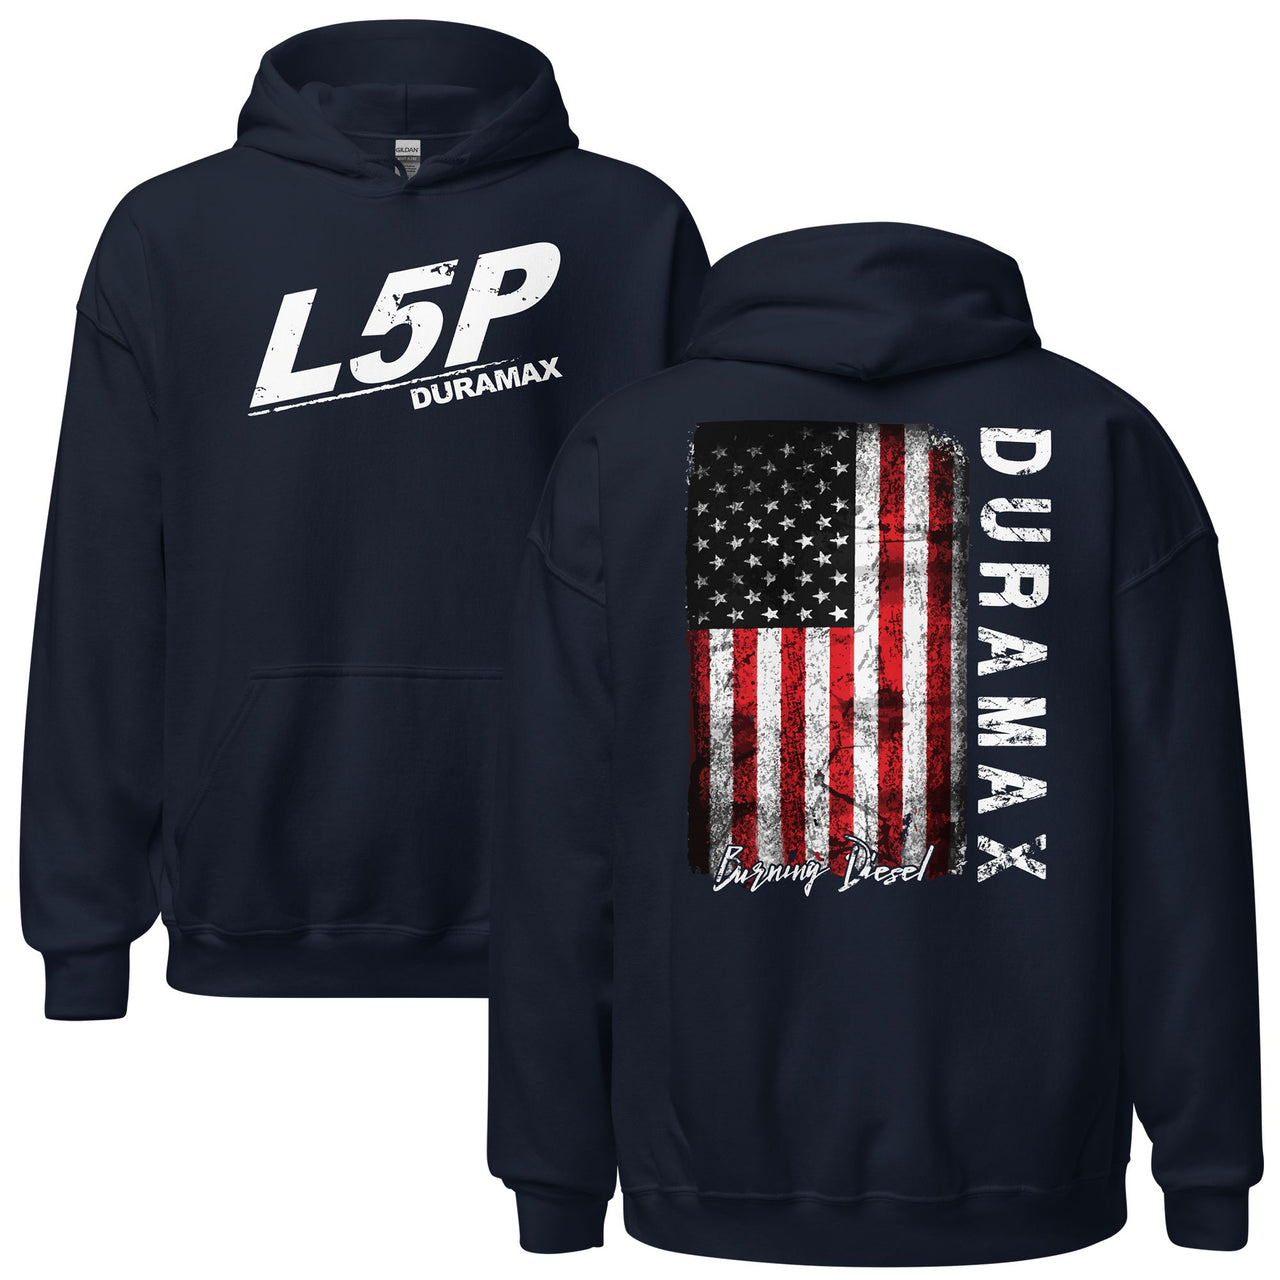 L5p Duramax Hoodie With American Flag Design-In-Navy-From Aggressive Thread